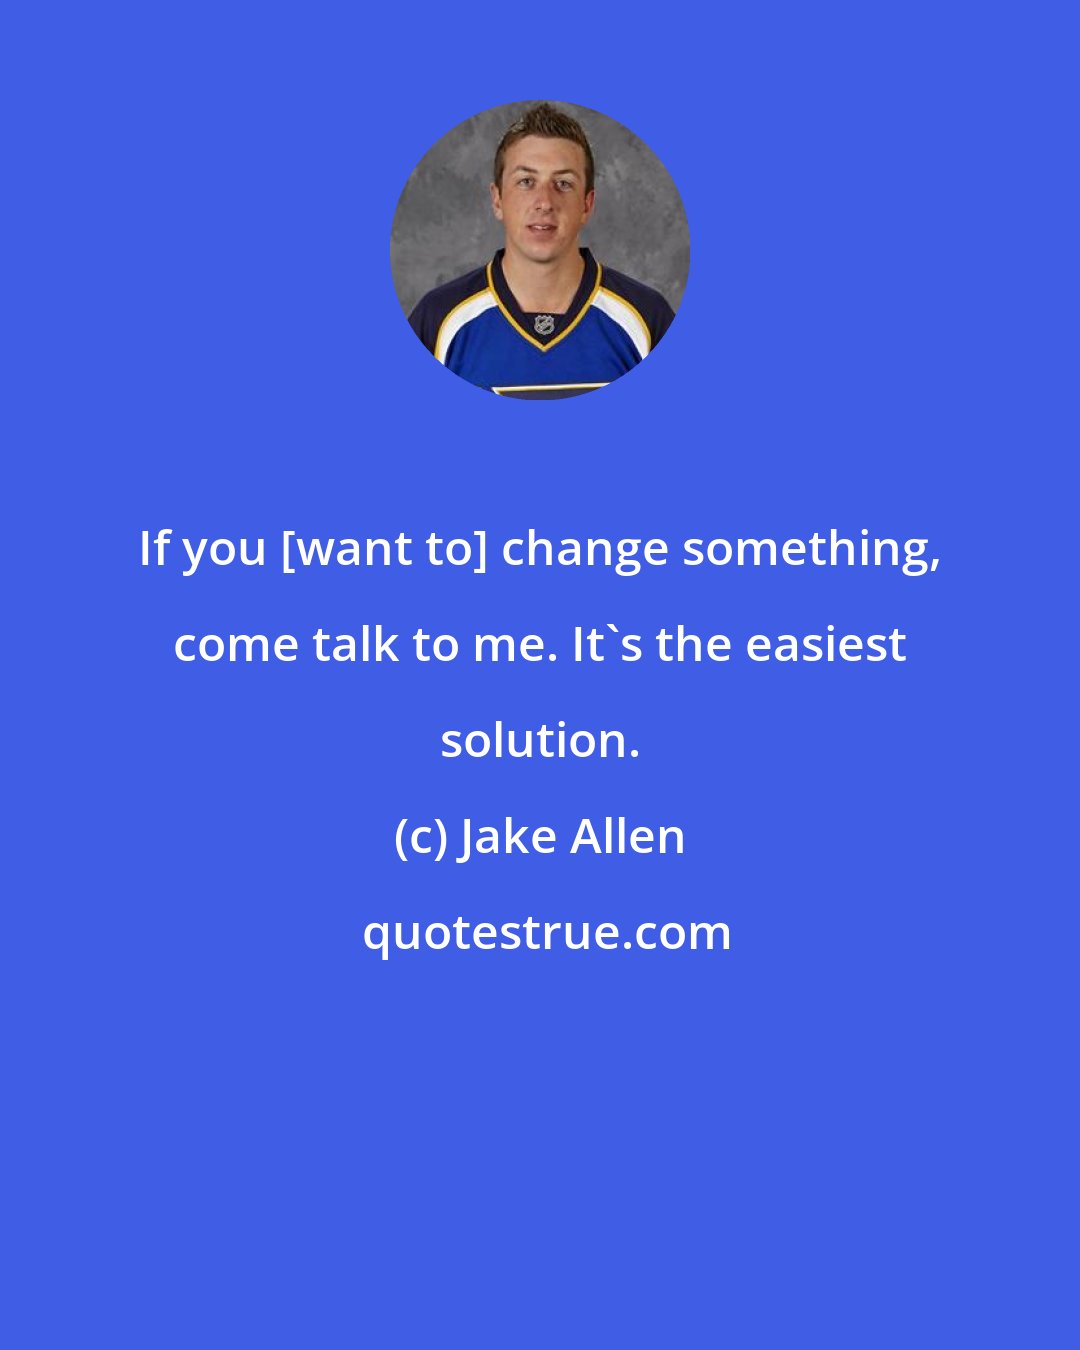 Jake Allen: If you [want to] change something, come talk to me. It's the easiest solution.